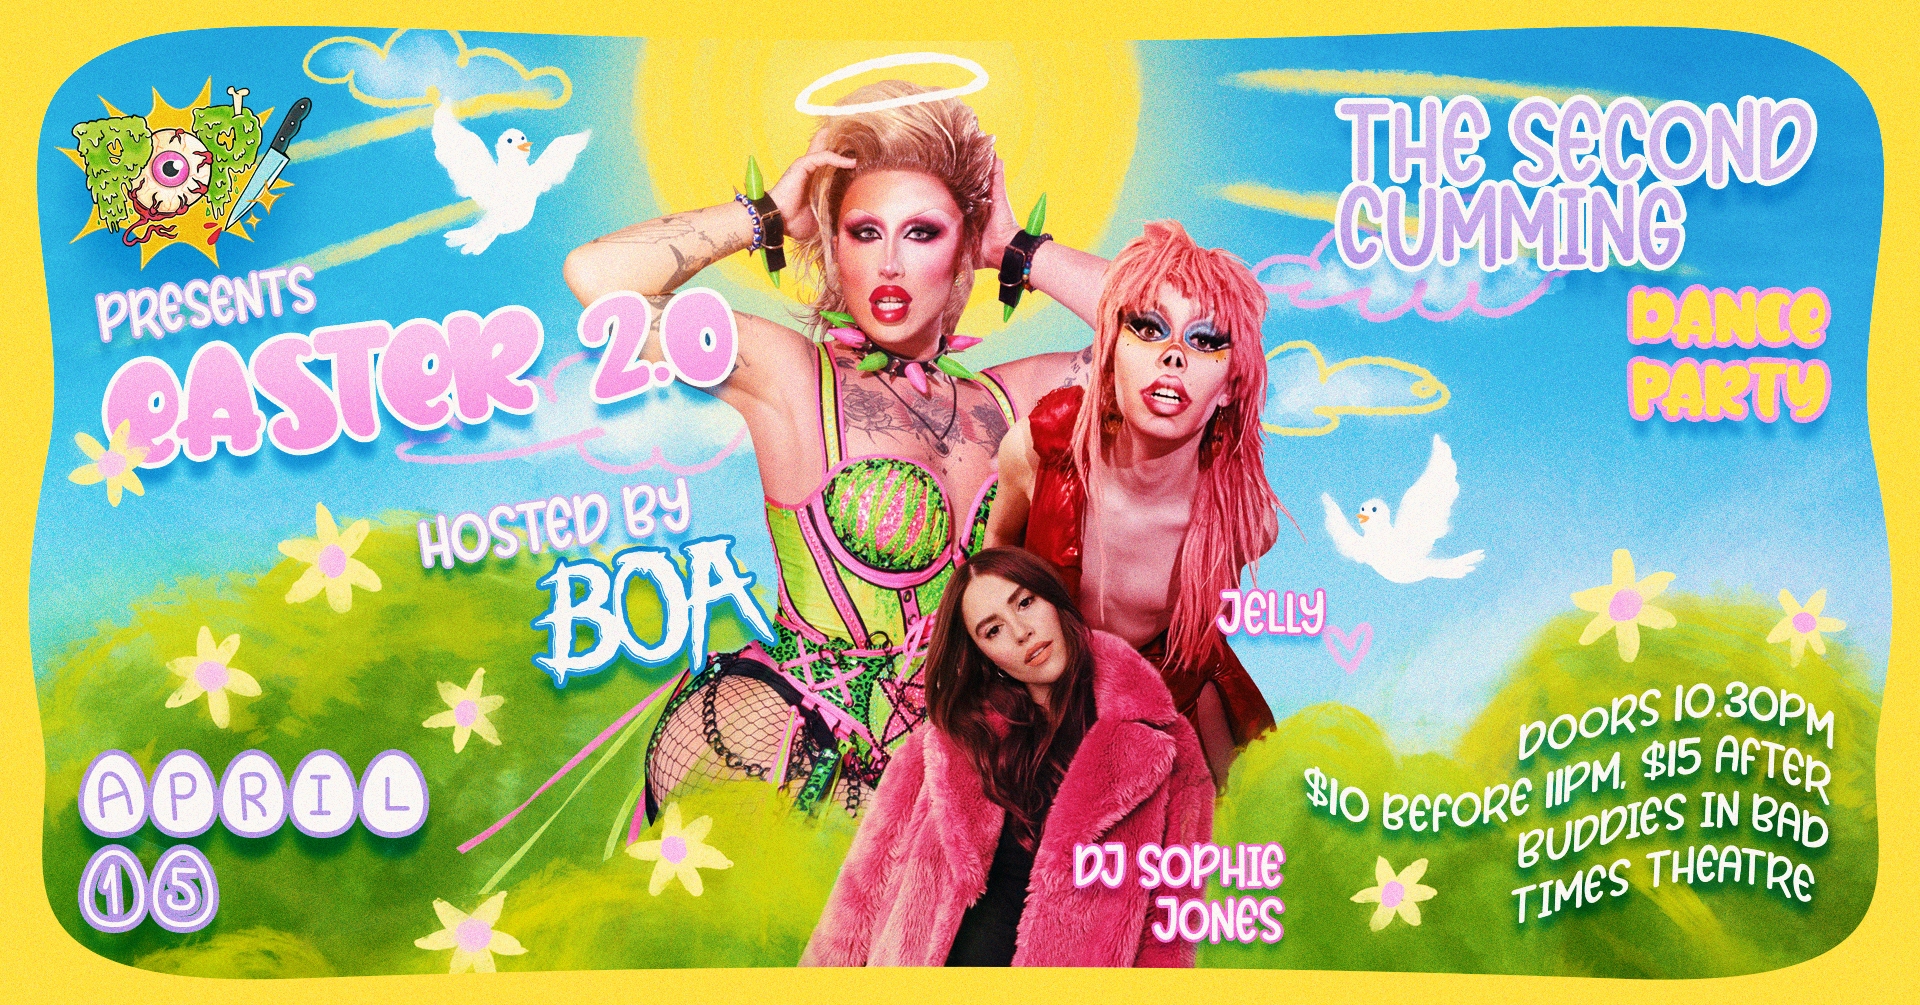 Promotional image for Easter 2.0. The backdrop is an illustrated landscape composed of a green grass field, flowers, a blue sky, flying birds, and the sun. The foreground of the image includes 3 performers aligned one behind the other. The performer at the front of the formation is DJ Sophie Jones, a medium skin toned person wearing a fluffy, big collared jacket. Behind DJ Sophie is Jelly, a medium-dark skin toned drag performer wearing an open vest. Behind Jelly is Boa, a light skin toned drag performer wearing a corset, fishnet tights, and a halo. Text reads: “Pop Presents Easter 2.0. Hosted by Boa. The Second Cumming Dance Party. April 15. Doors 10:30pm. 10 dollars before 11pm, 15 dollars after. Buddies in Bad Times Theatre.”